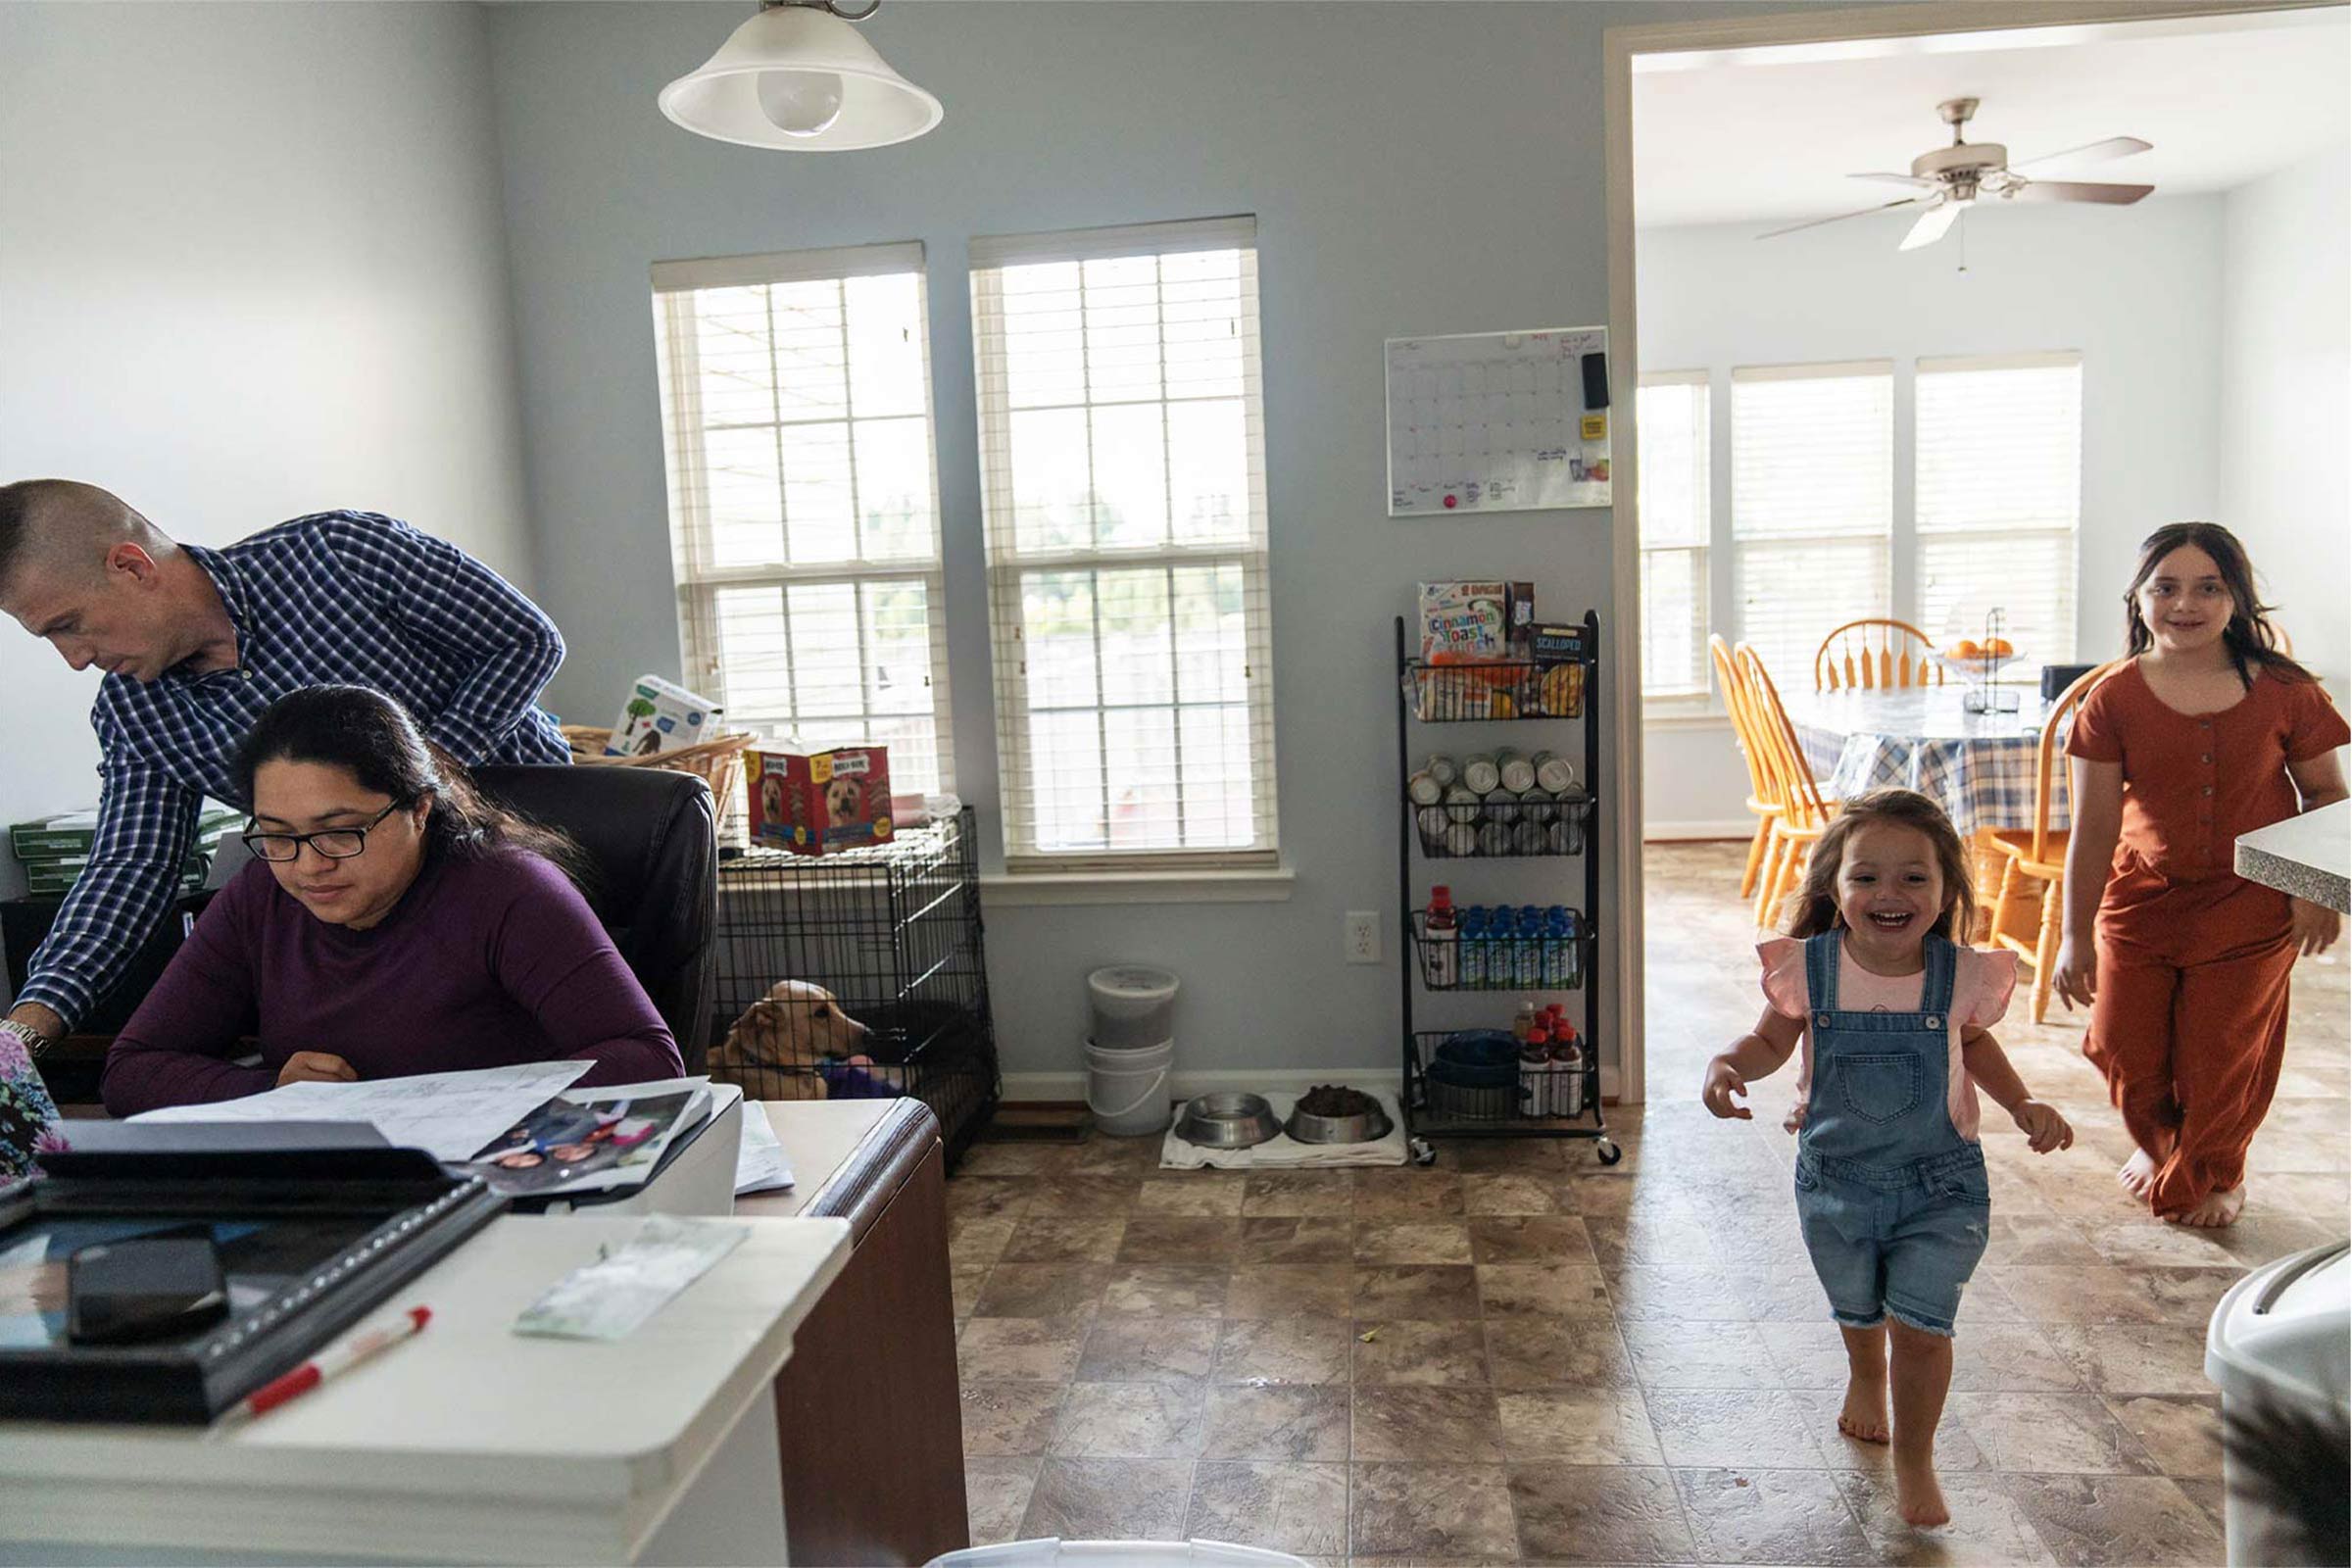 A woman studies at a desk while a young girl chases her little sister across the living room